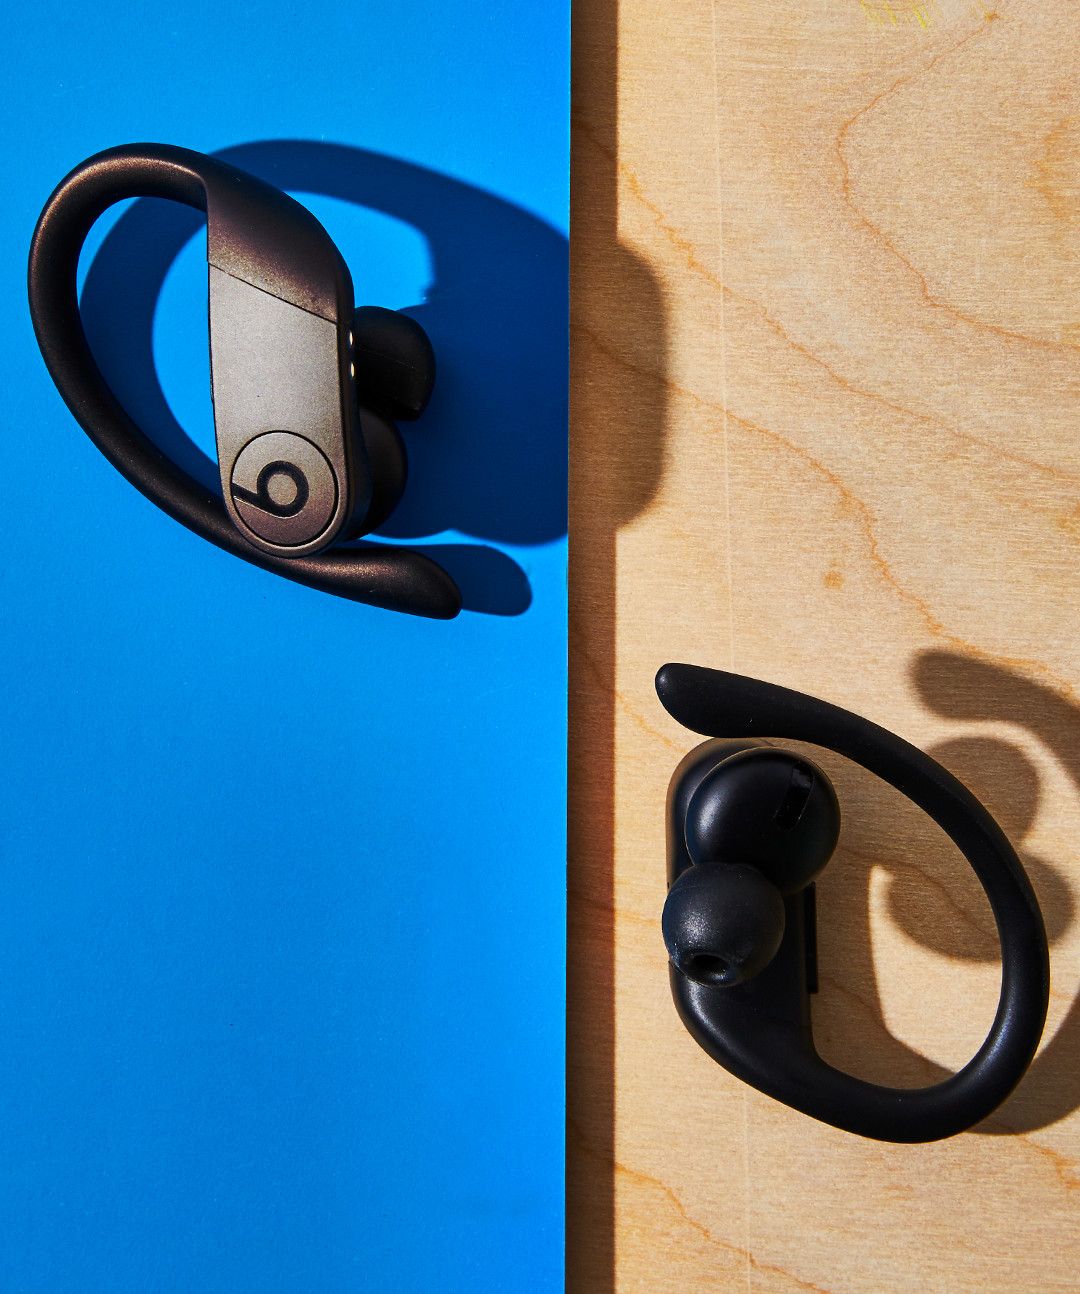 Powerbeats Pro from Beats Are the Best Wireless Headphones to Buy